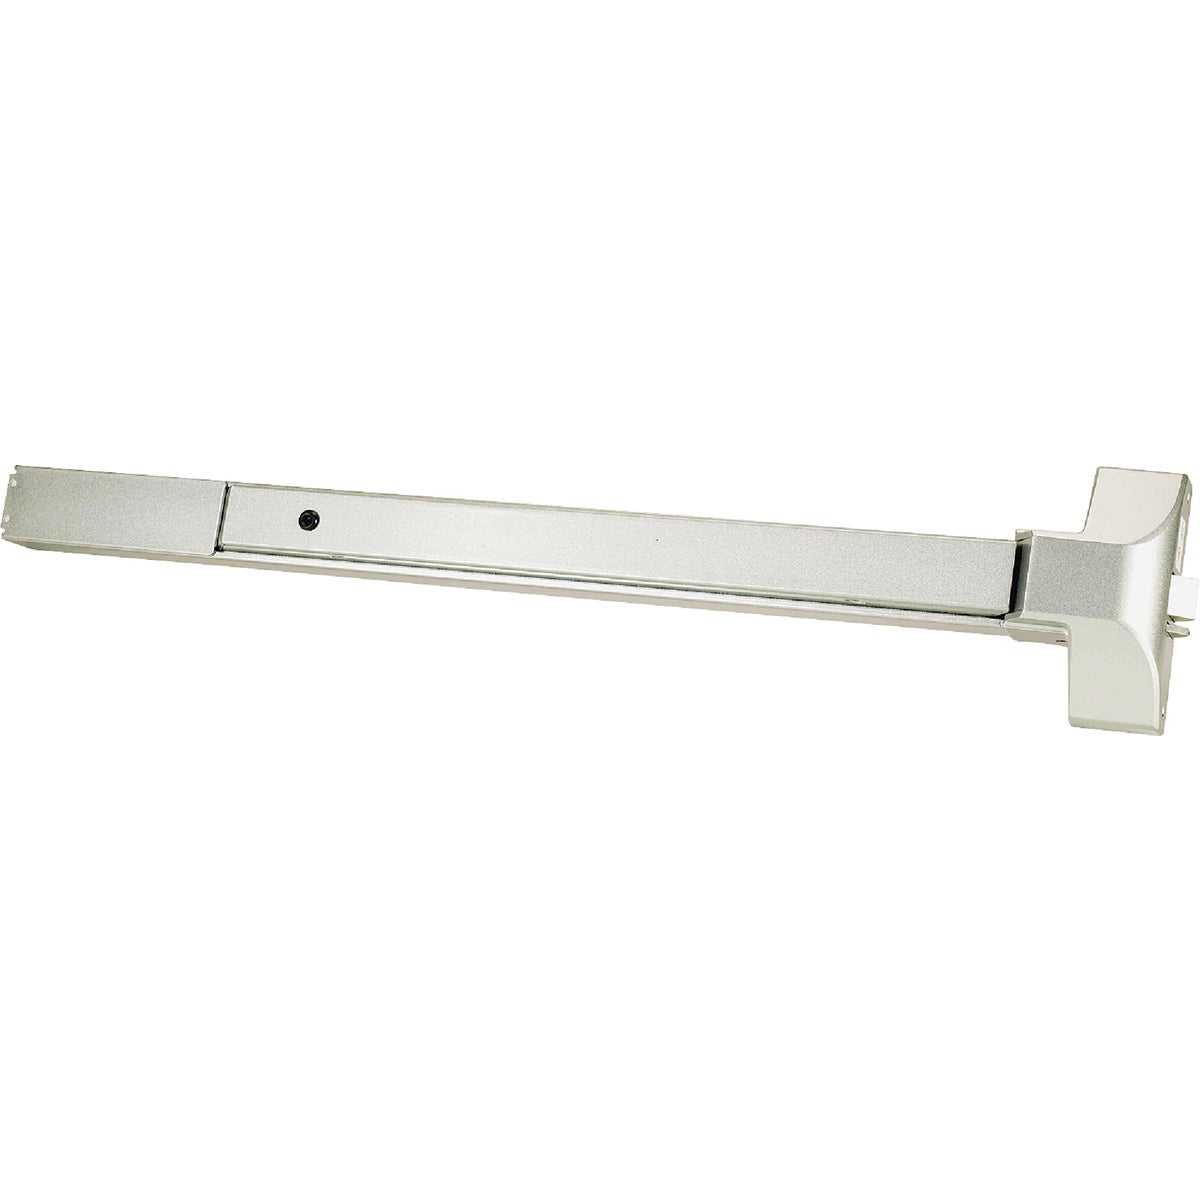 Tell Commercial Aluminum Exit Panic Bar